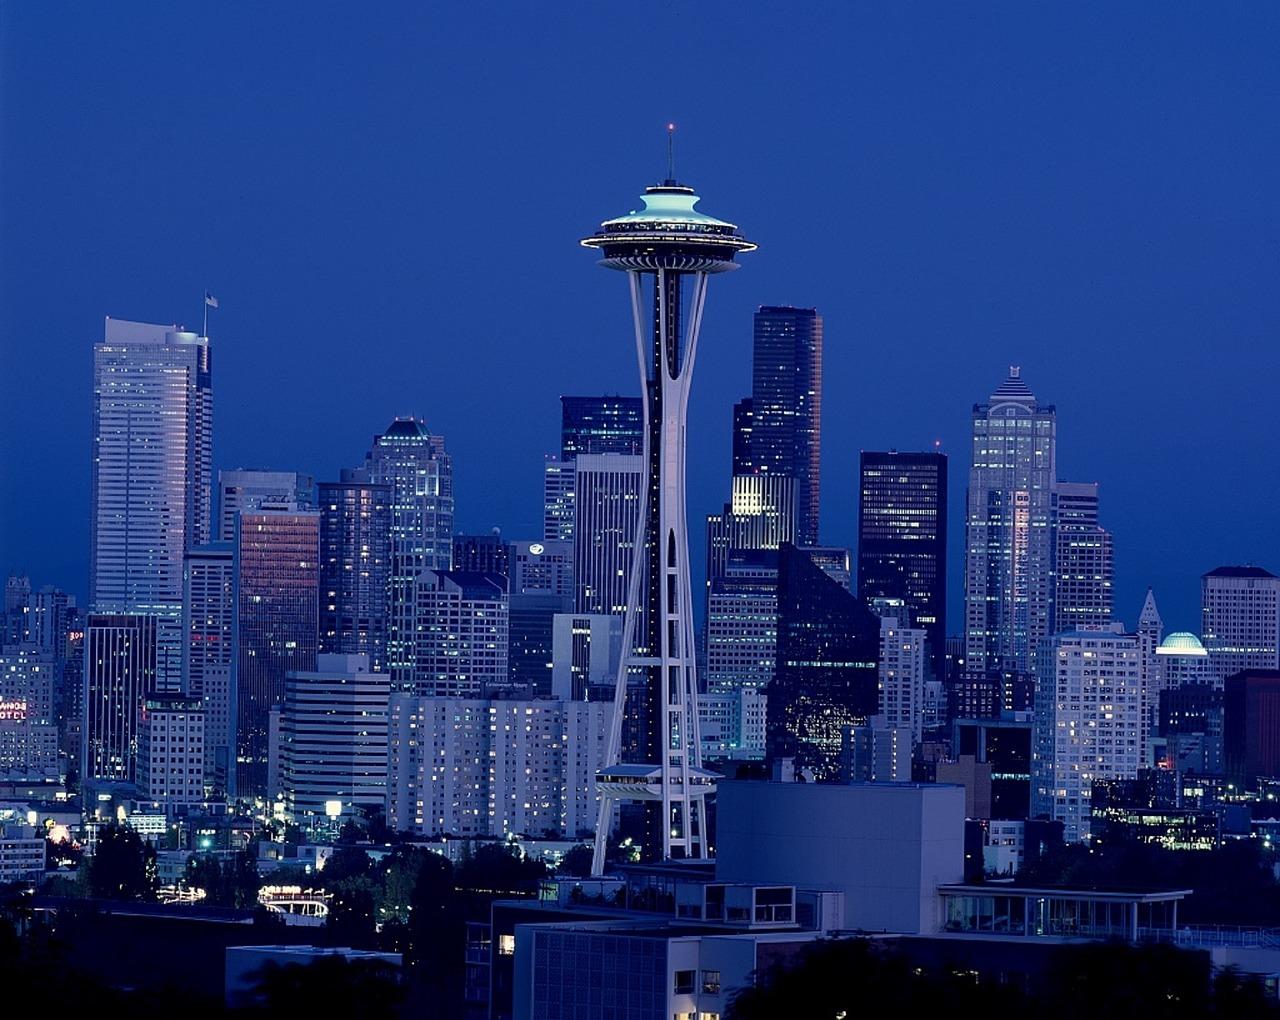 America is Seattle, which was named as the best city in the US for wheelchair access according to this travelling abroad with a disability guide